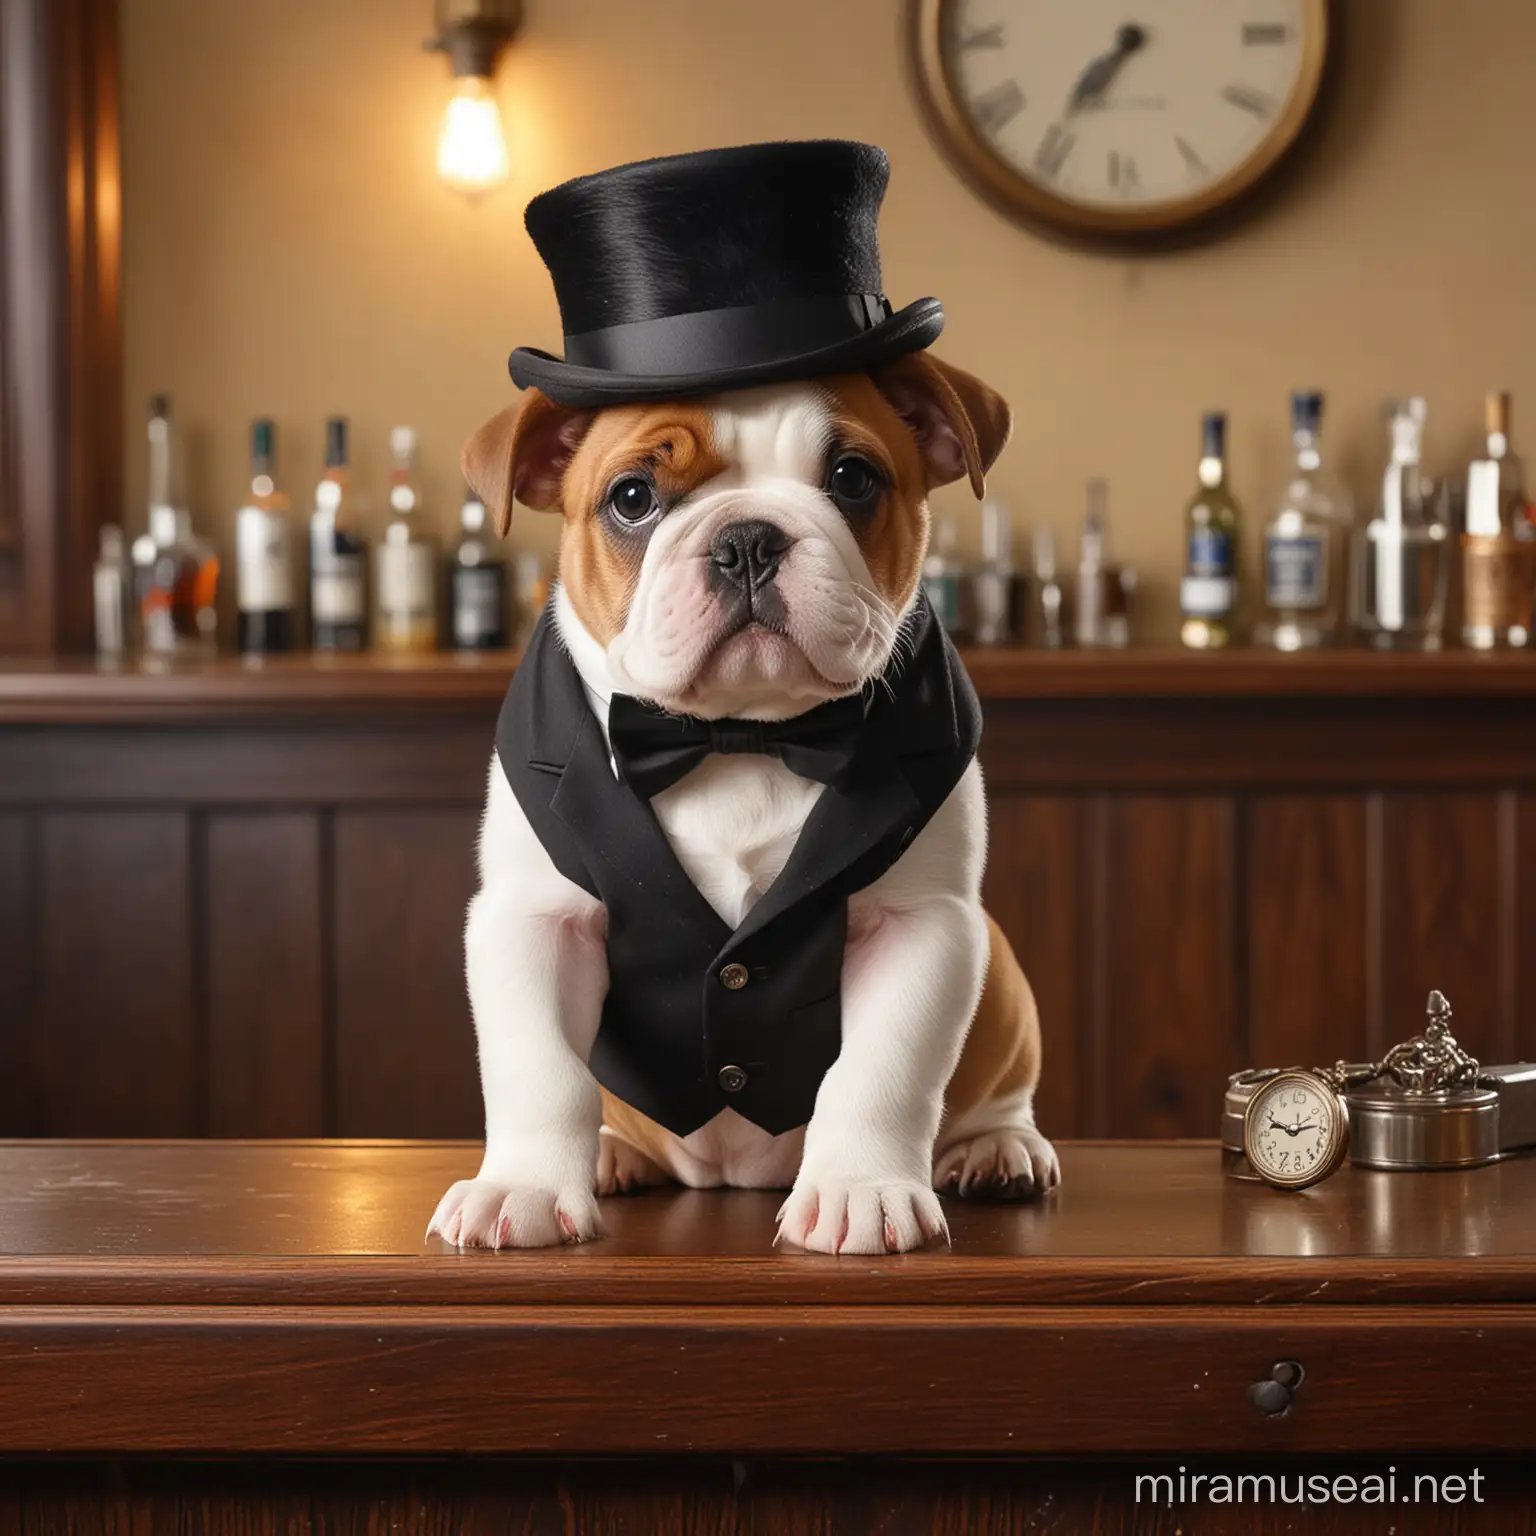 a realistic bull dog puppy wearing a top hat and pocket watch, sitting on top of a bar counter